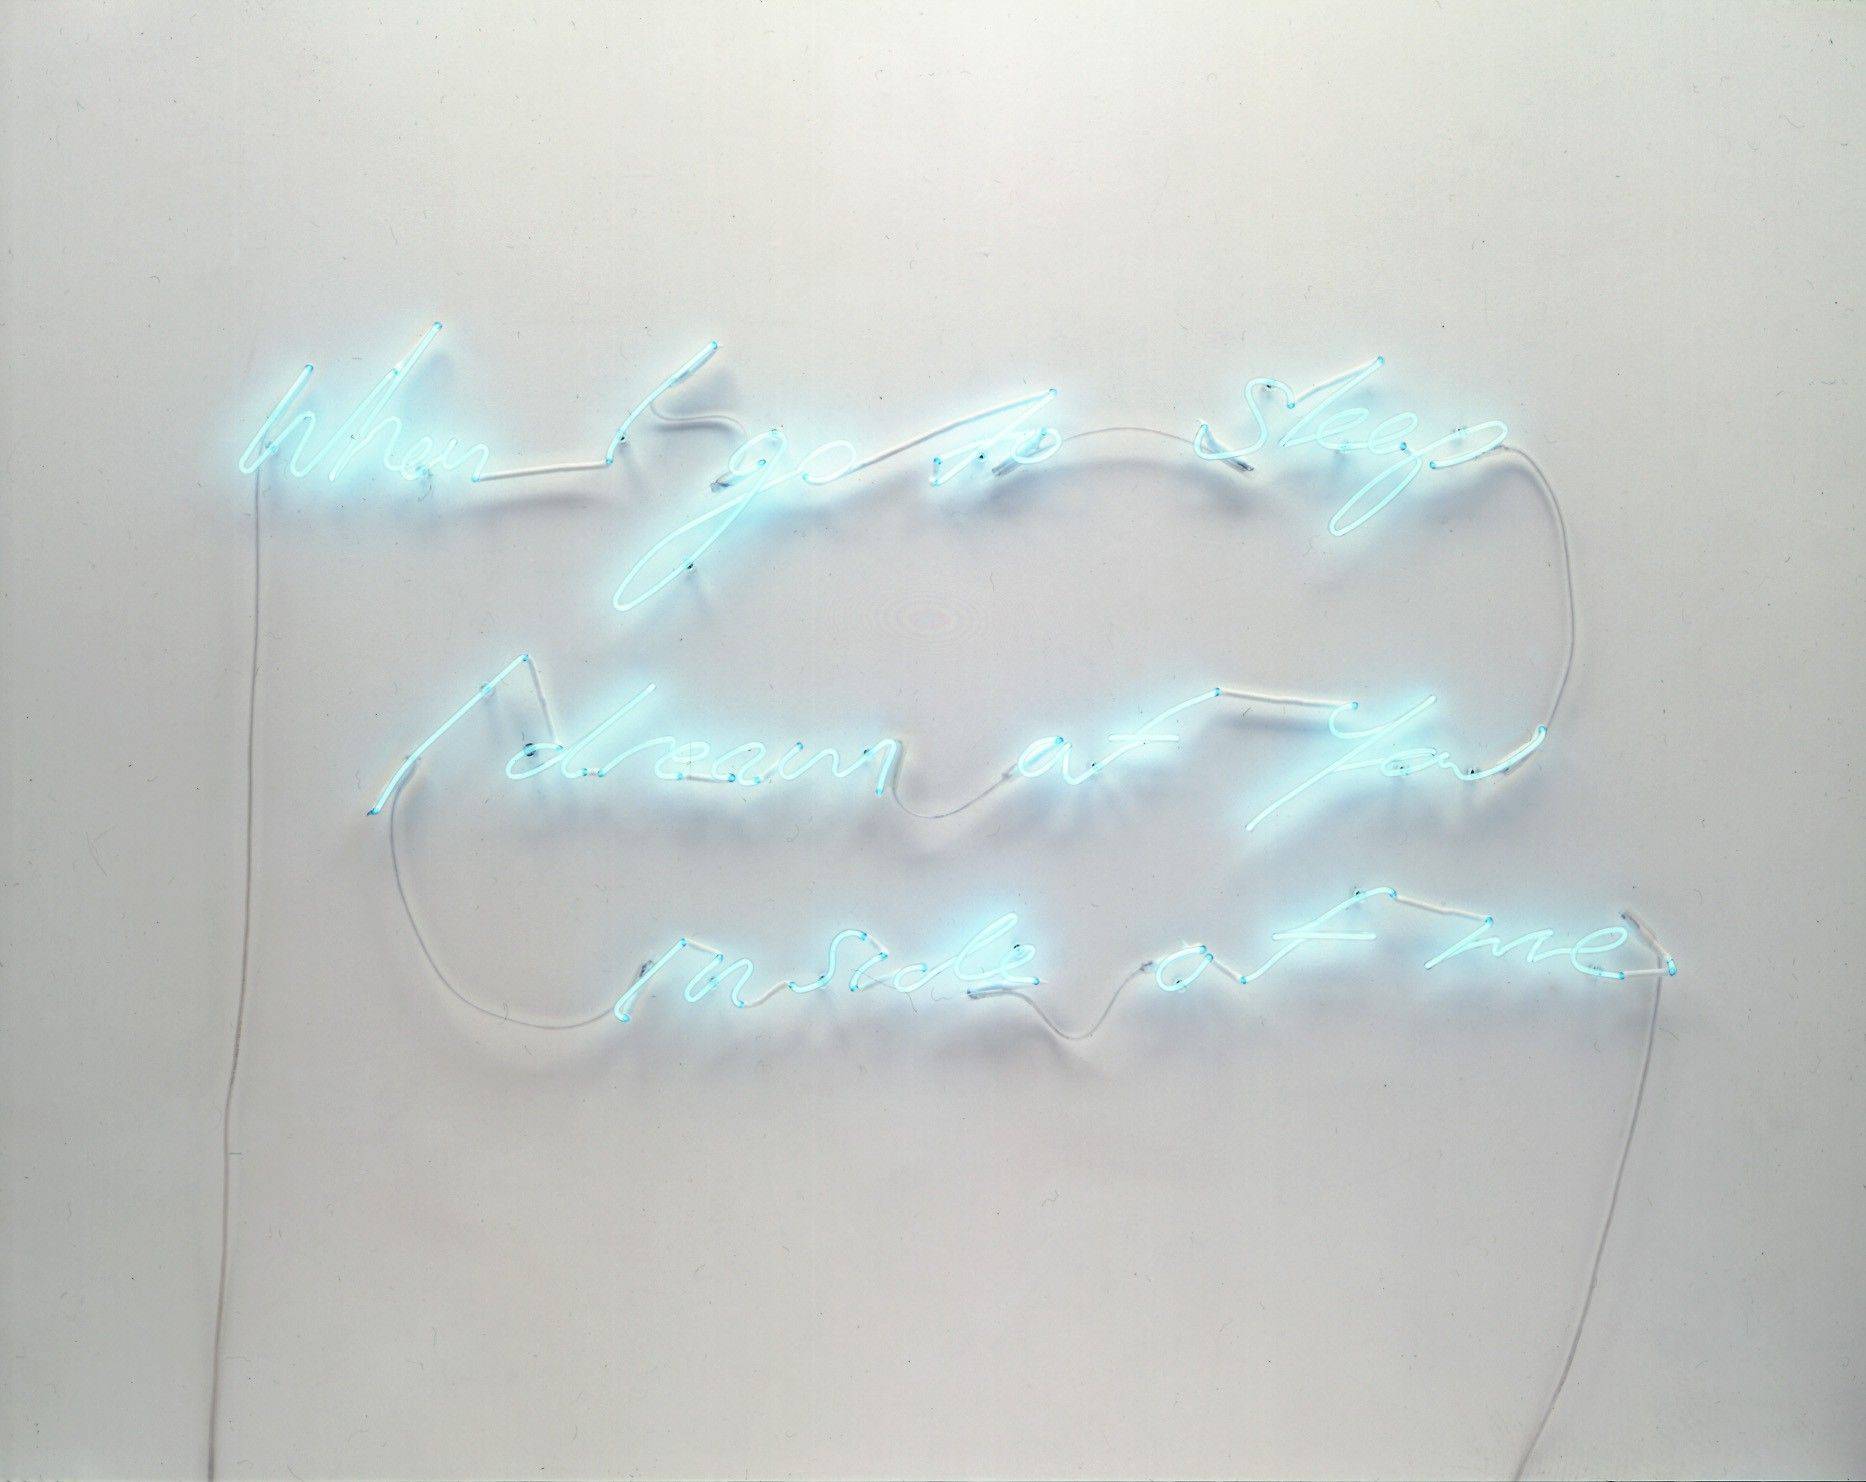 Tracey Emin "When I go to sleep I dream of you inside of me" © Sotheby's Paris